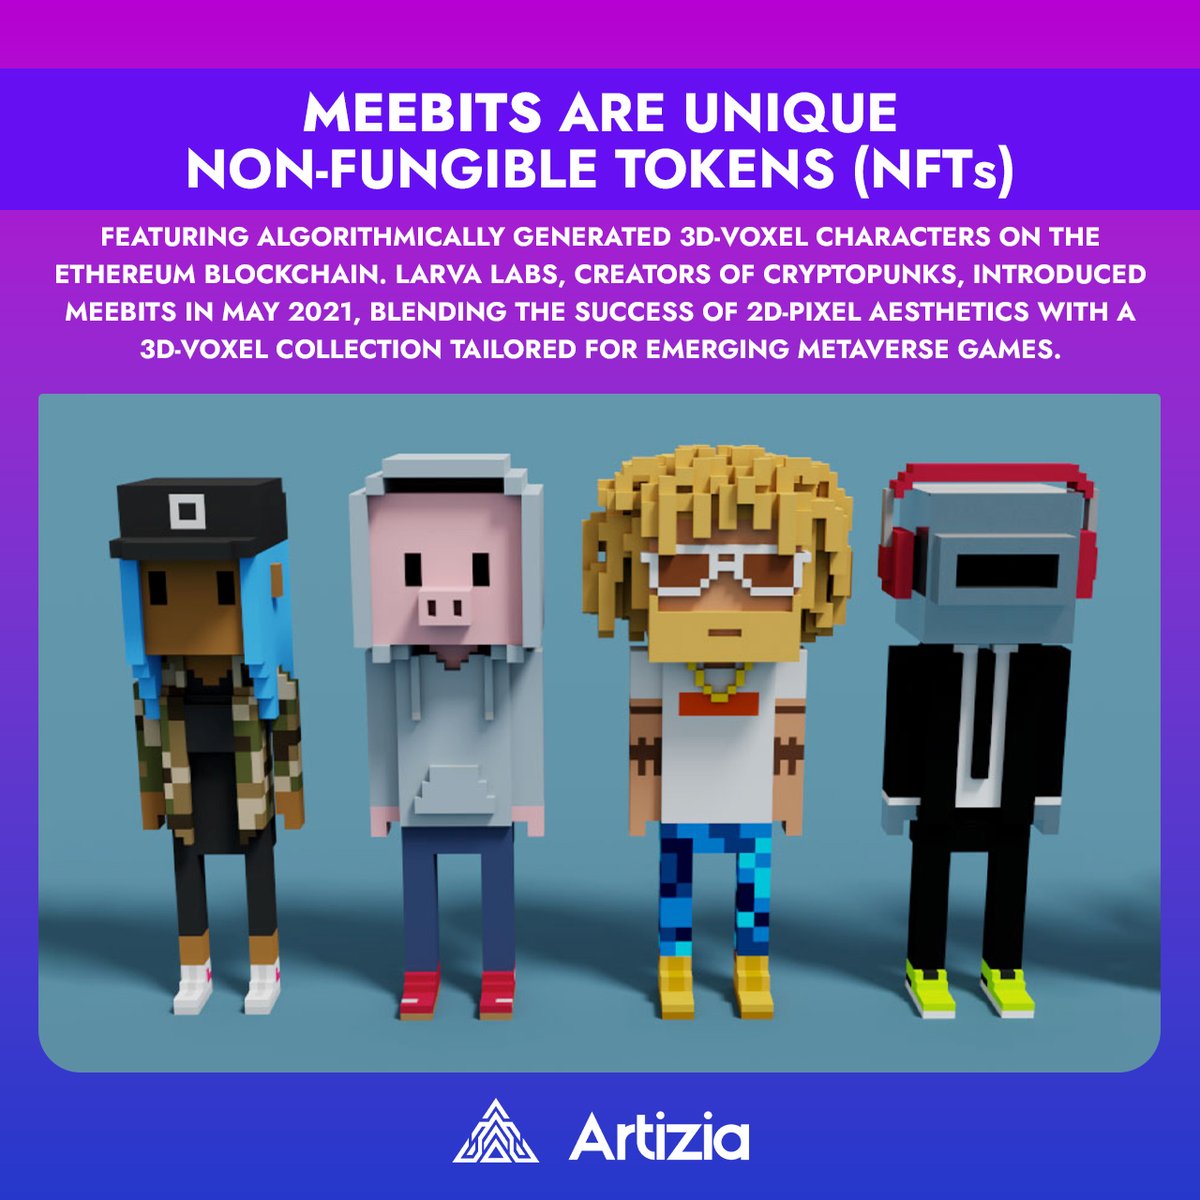 Meet the Meebits! 👾🔷 From the creators of CryptoPunks, these voxel NFTs are shaping the Metaverse. Get your pixel piece of the future! 🌐✨
.
.
.
#NFTs #Metaverse #3DArt #CryptoPunks #Meebits #Blockchain #InnovativeArt #NFTCollectors #VirtualWorlds #GameFi #Gaming #LarvaLabs